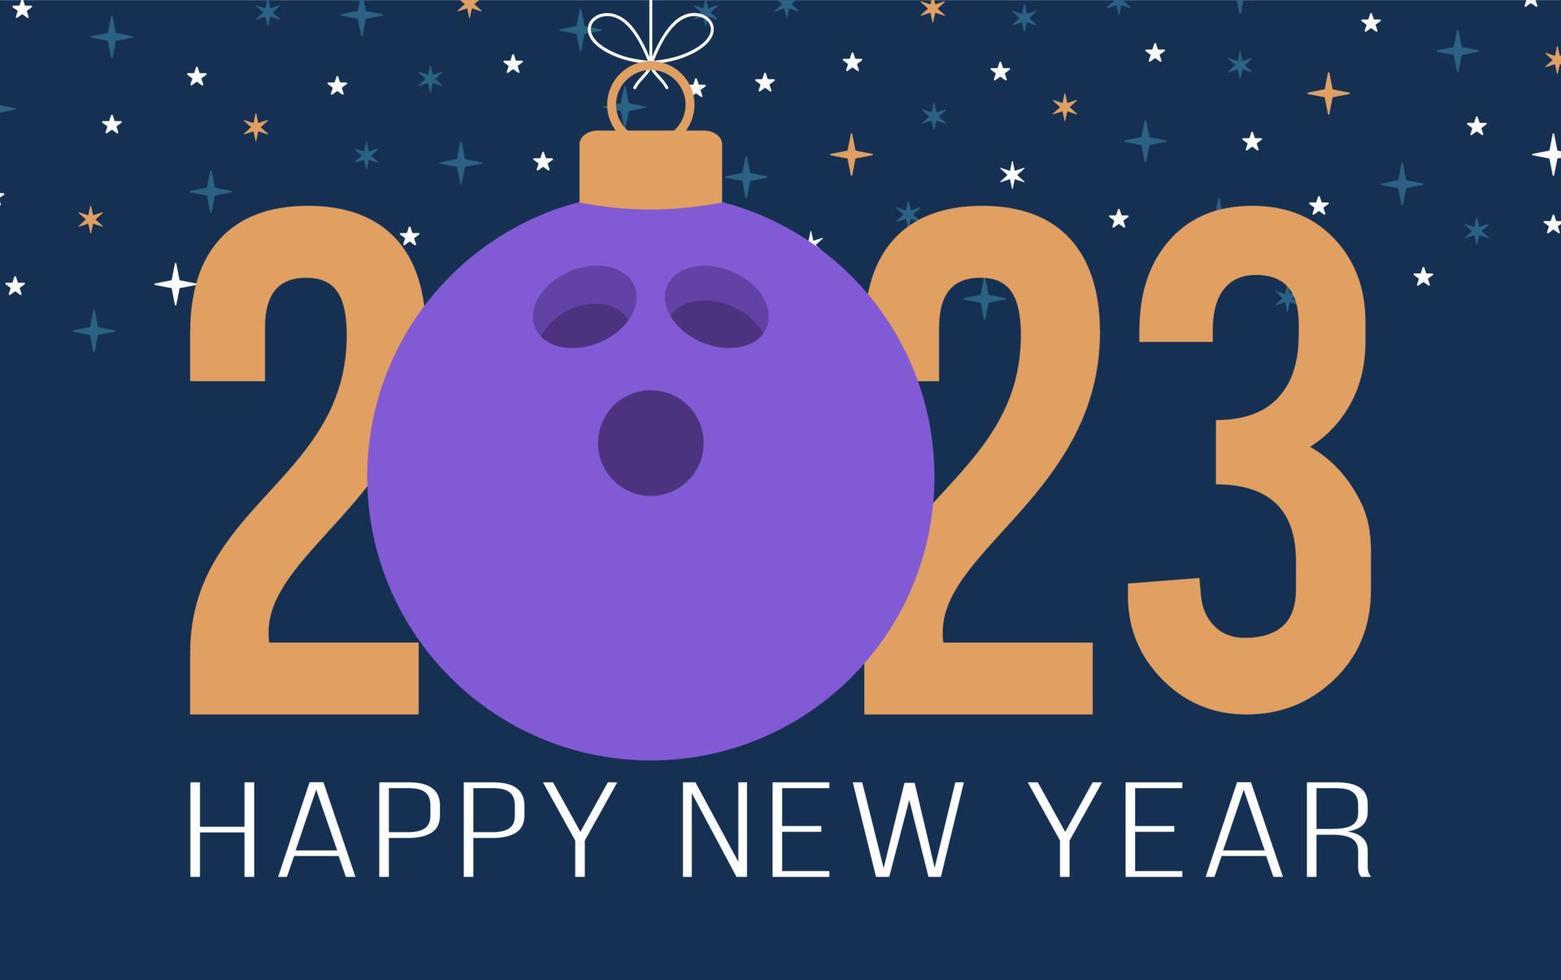 Bowling 2023 Happy New Year. Sports greeting card with violet bowling ball on the flat background. Vector illustration.